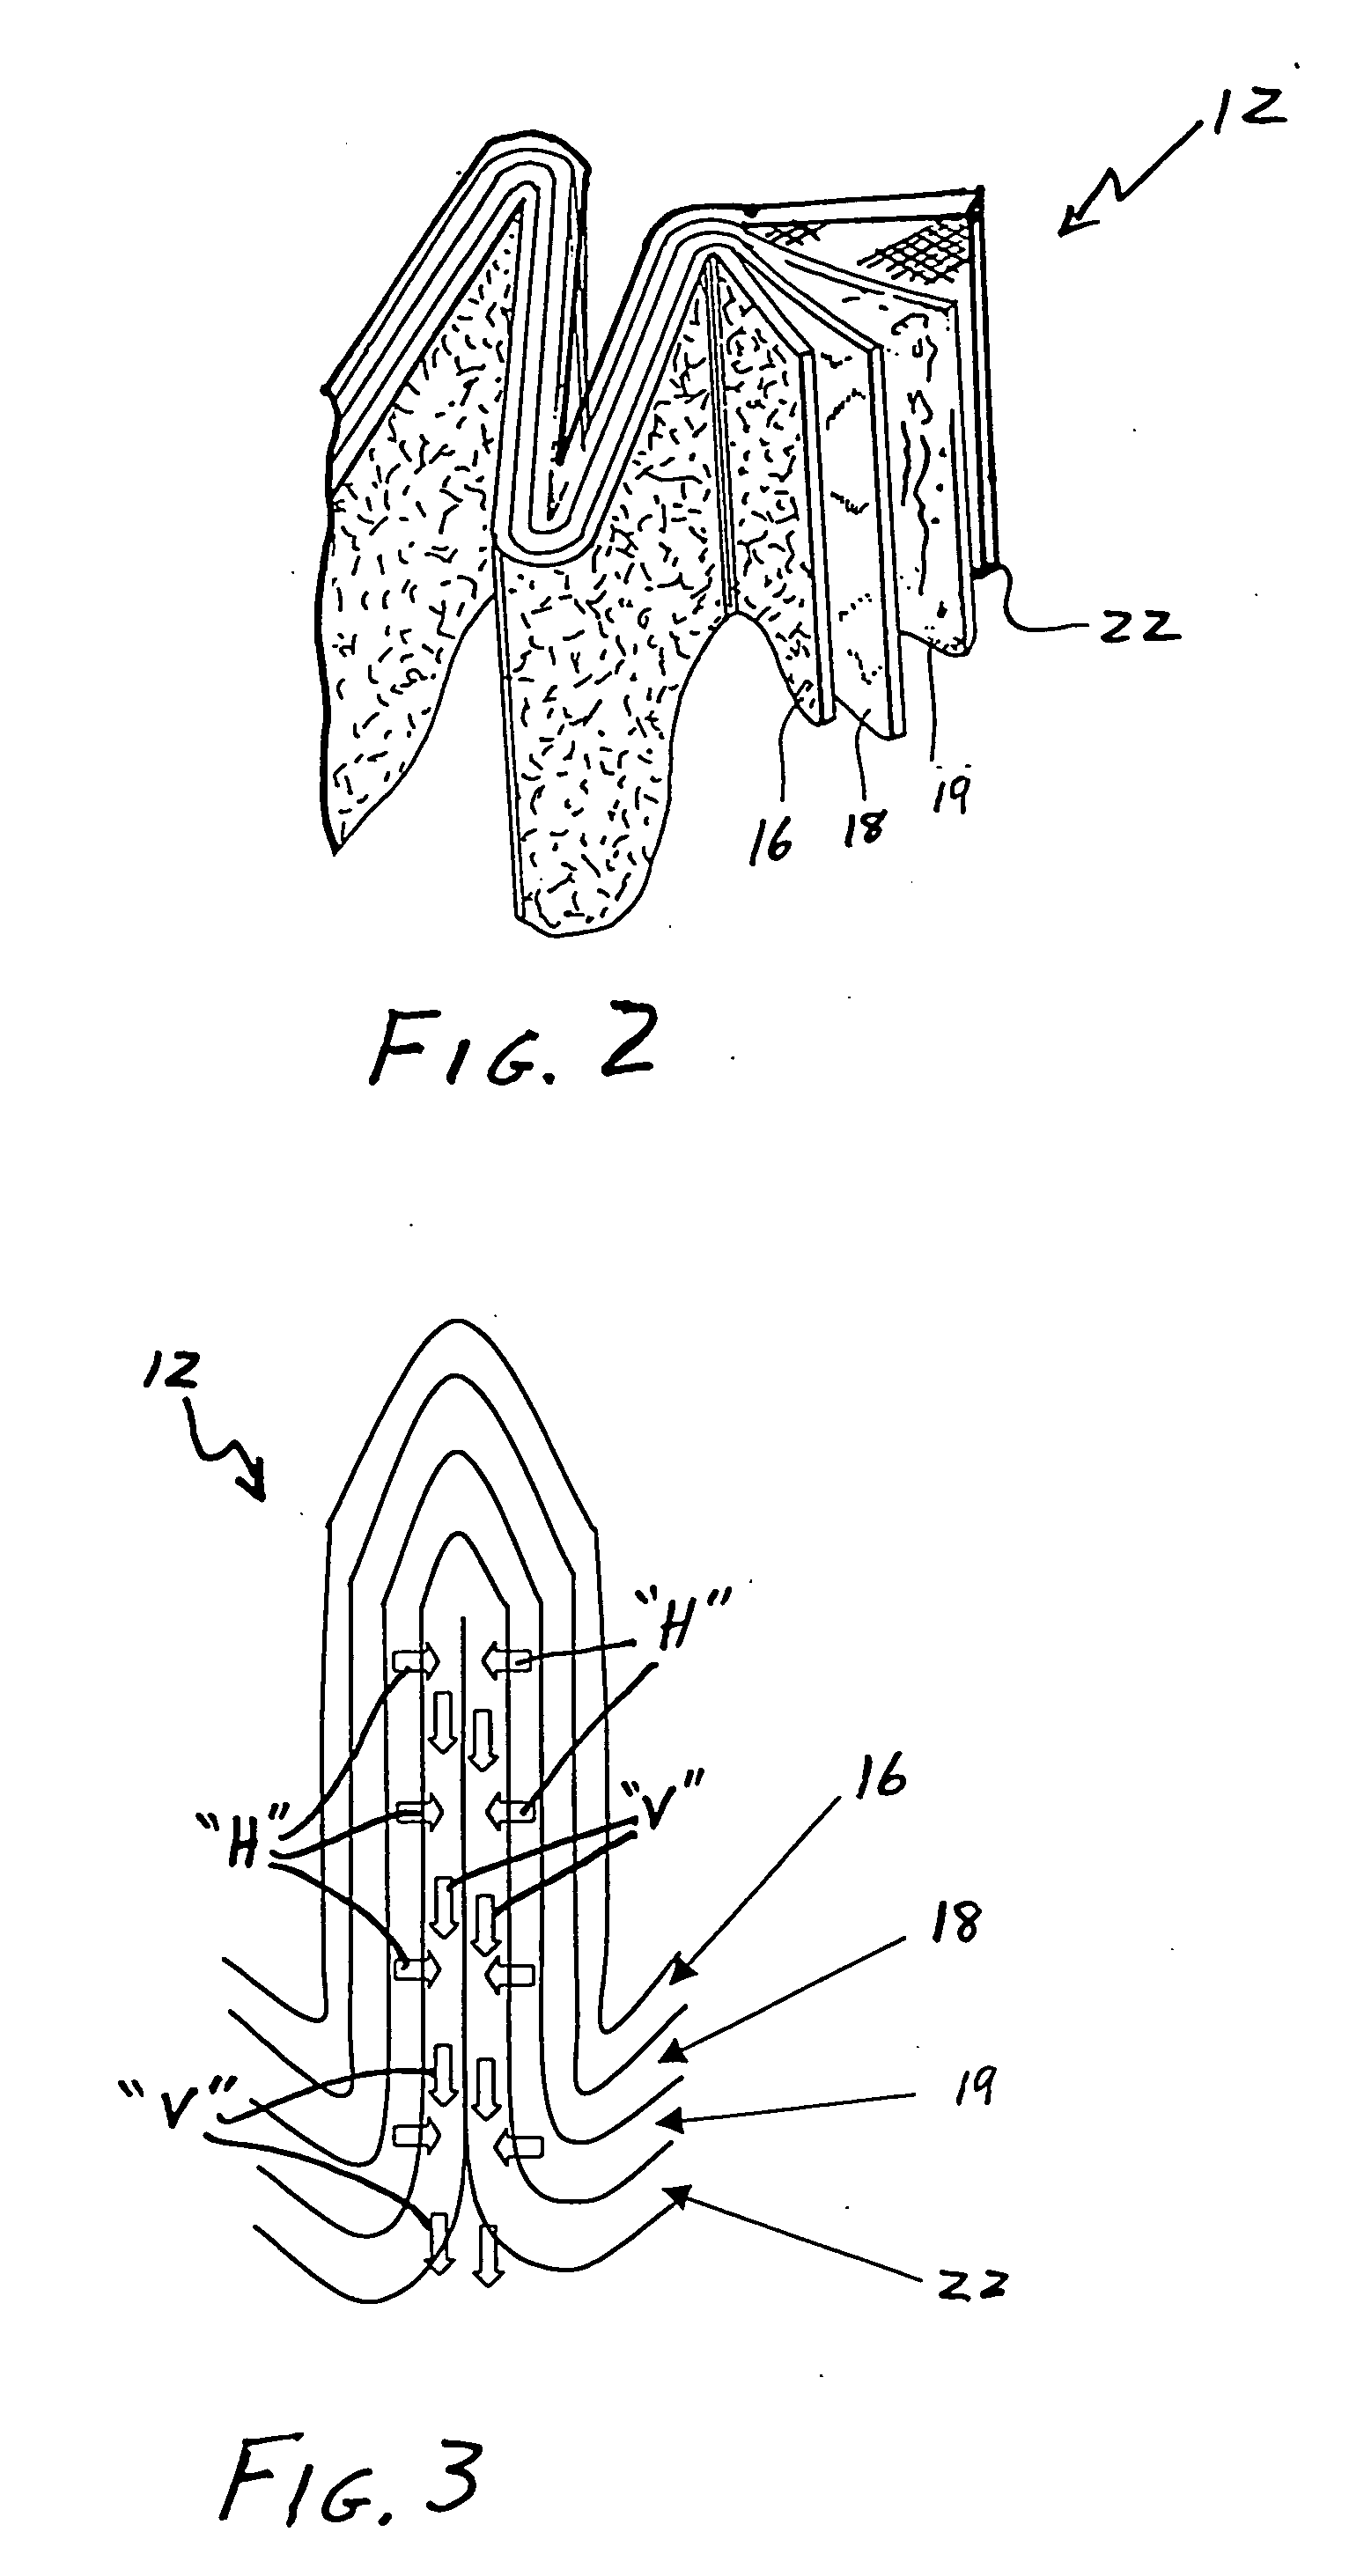 Multi-layer pleat support filter construction